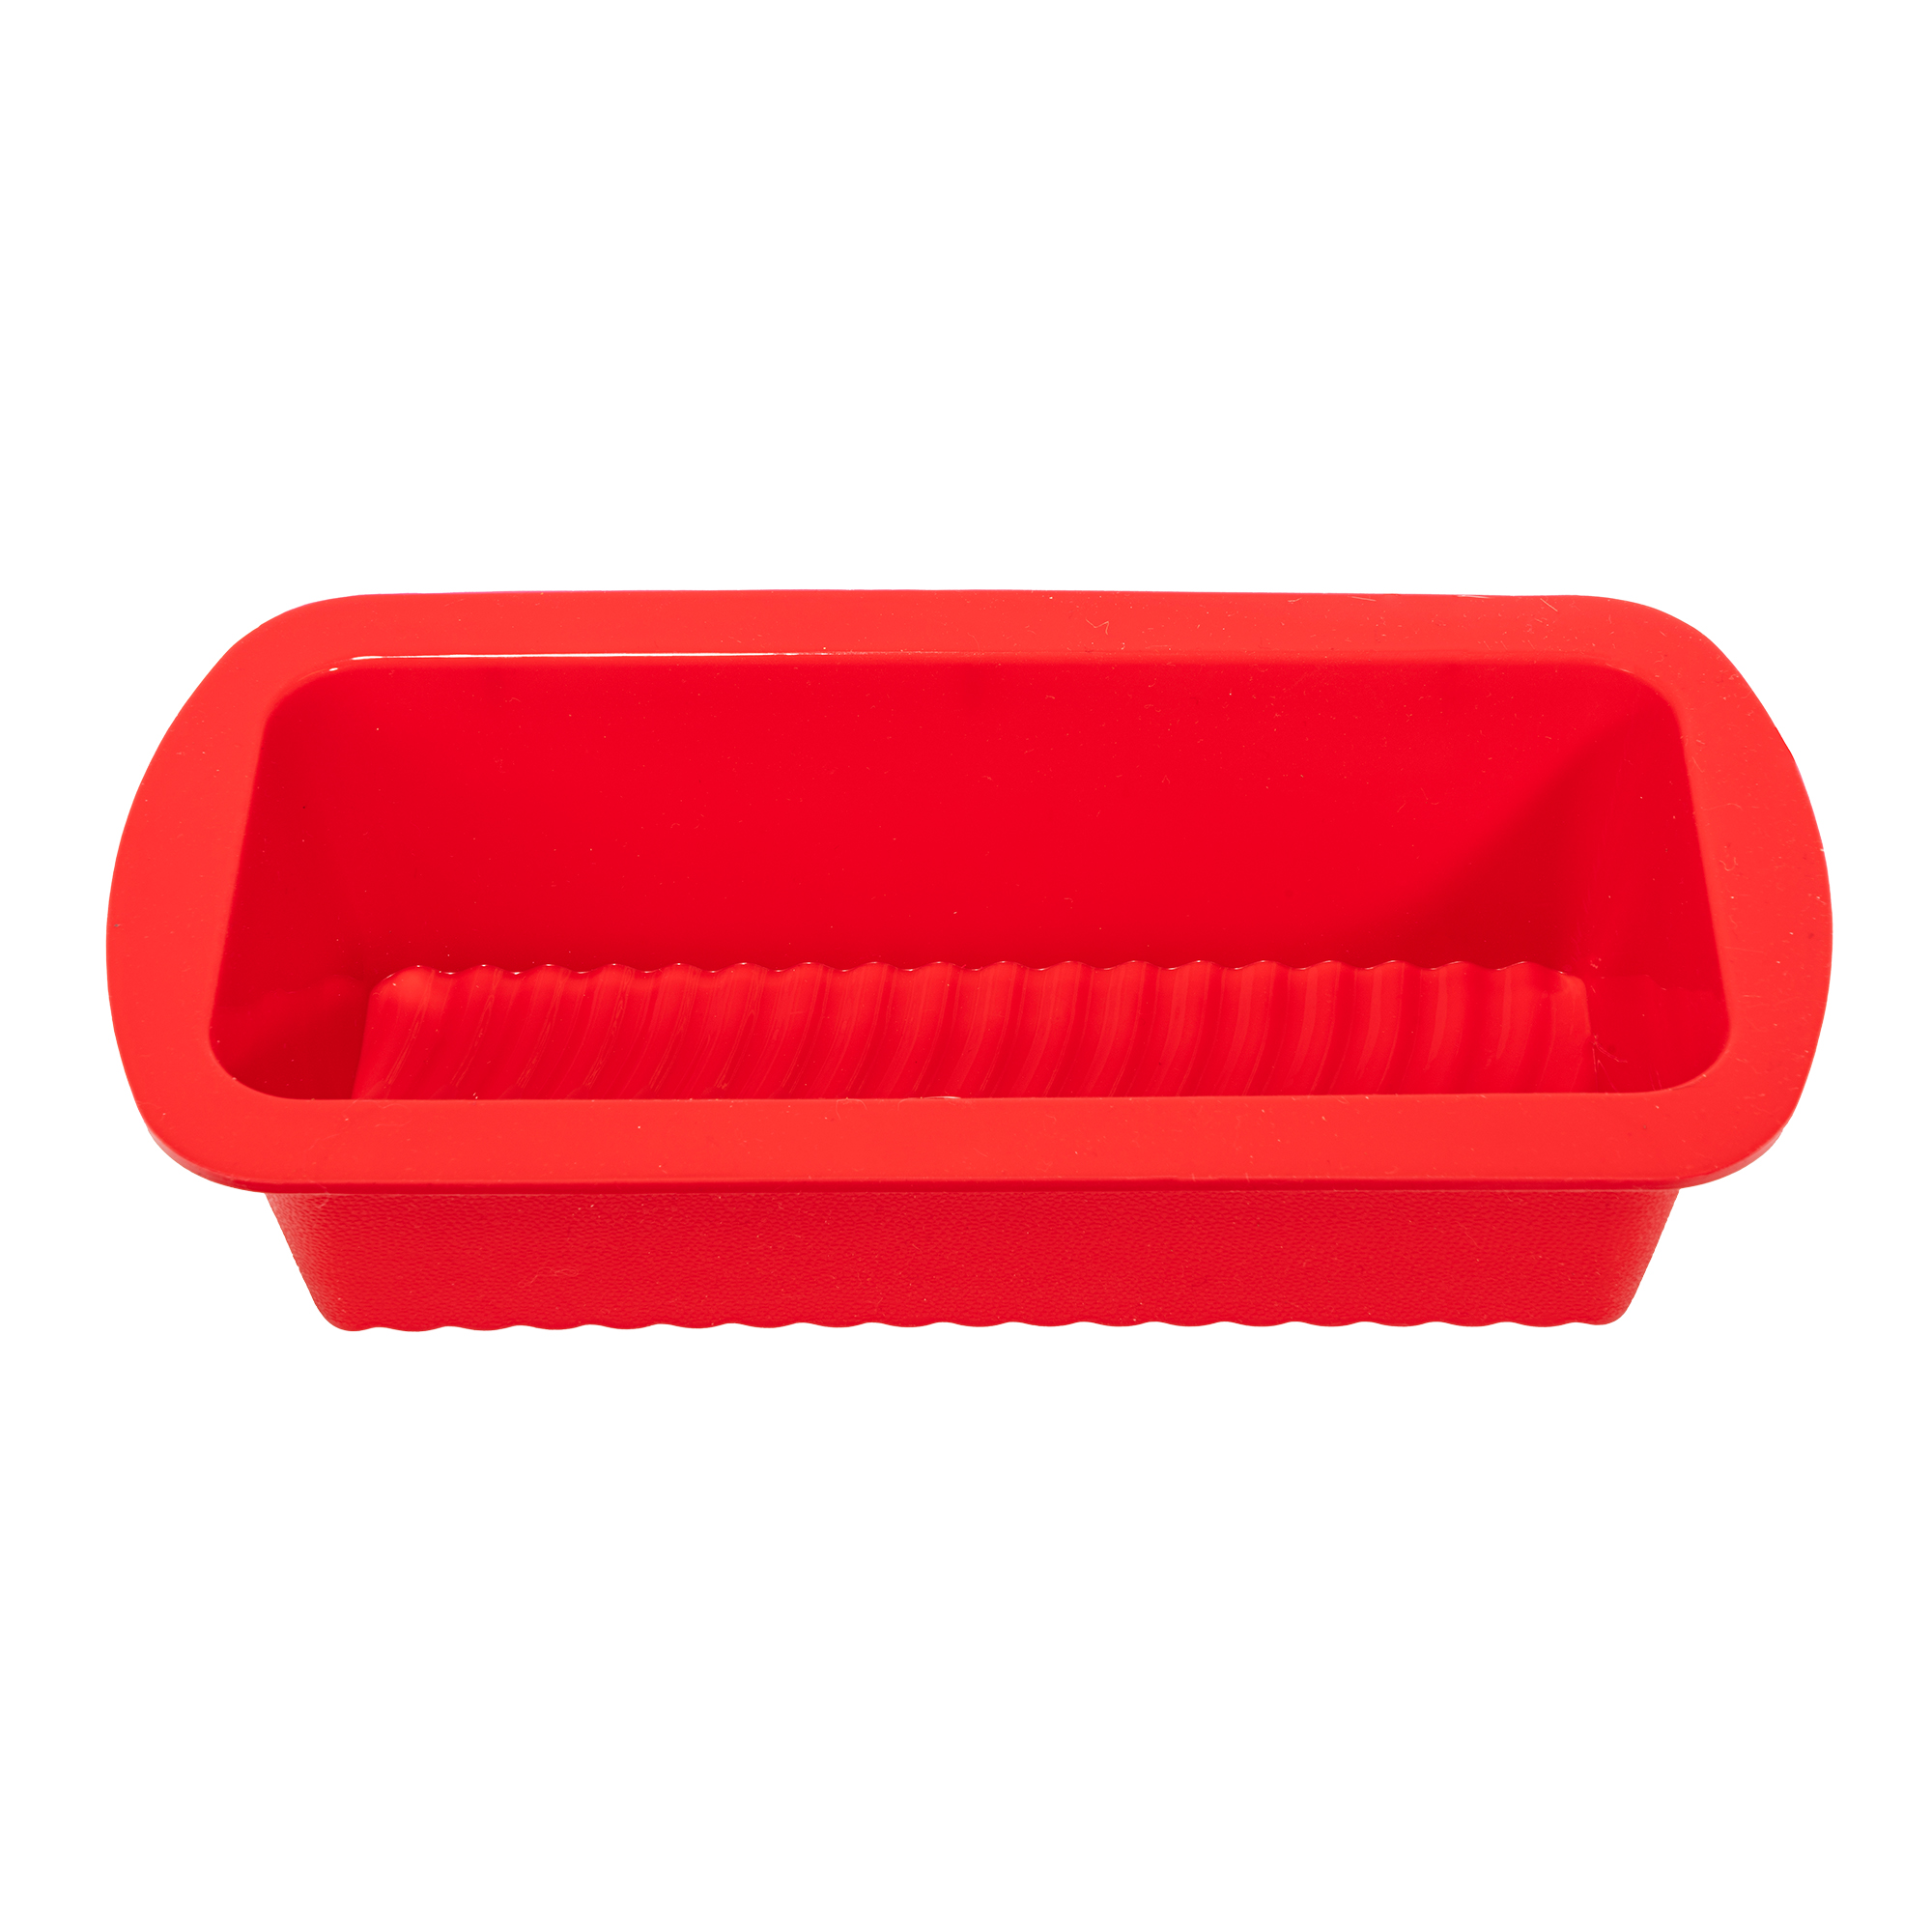 Silicone Loaf Cake Mold - Red